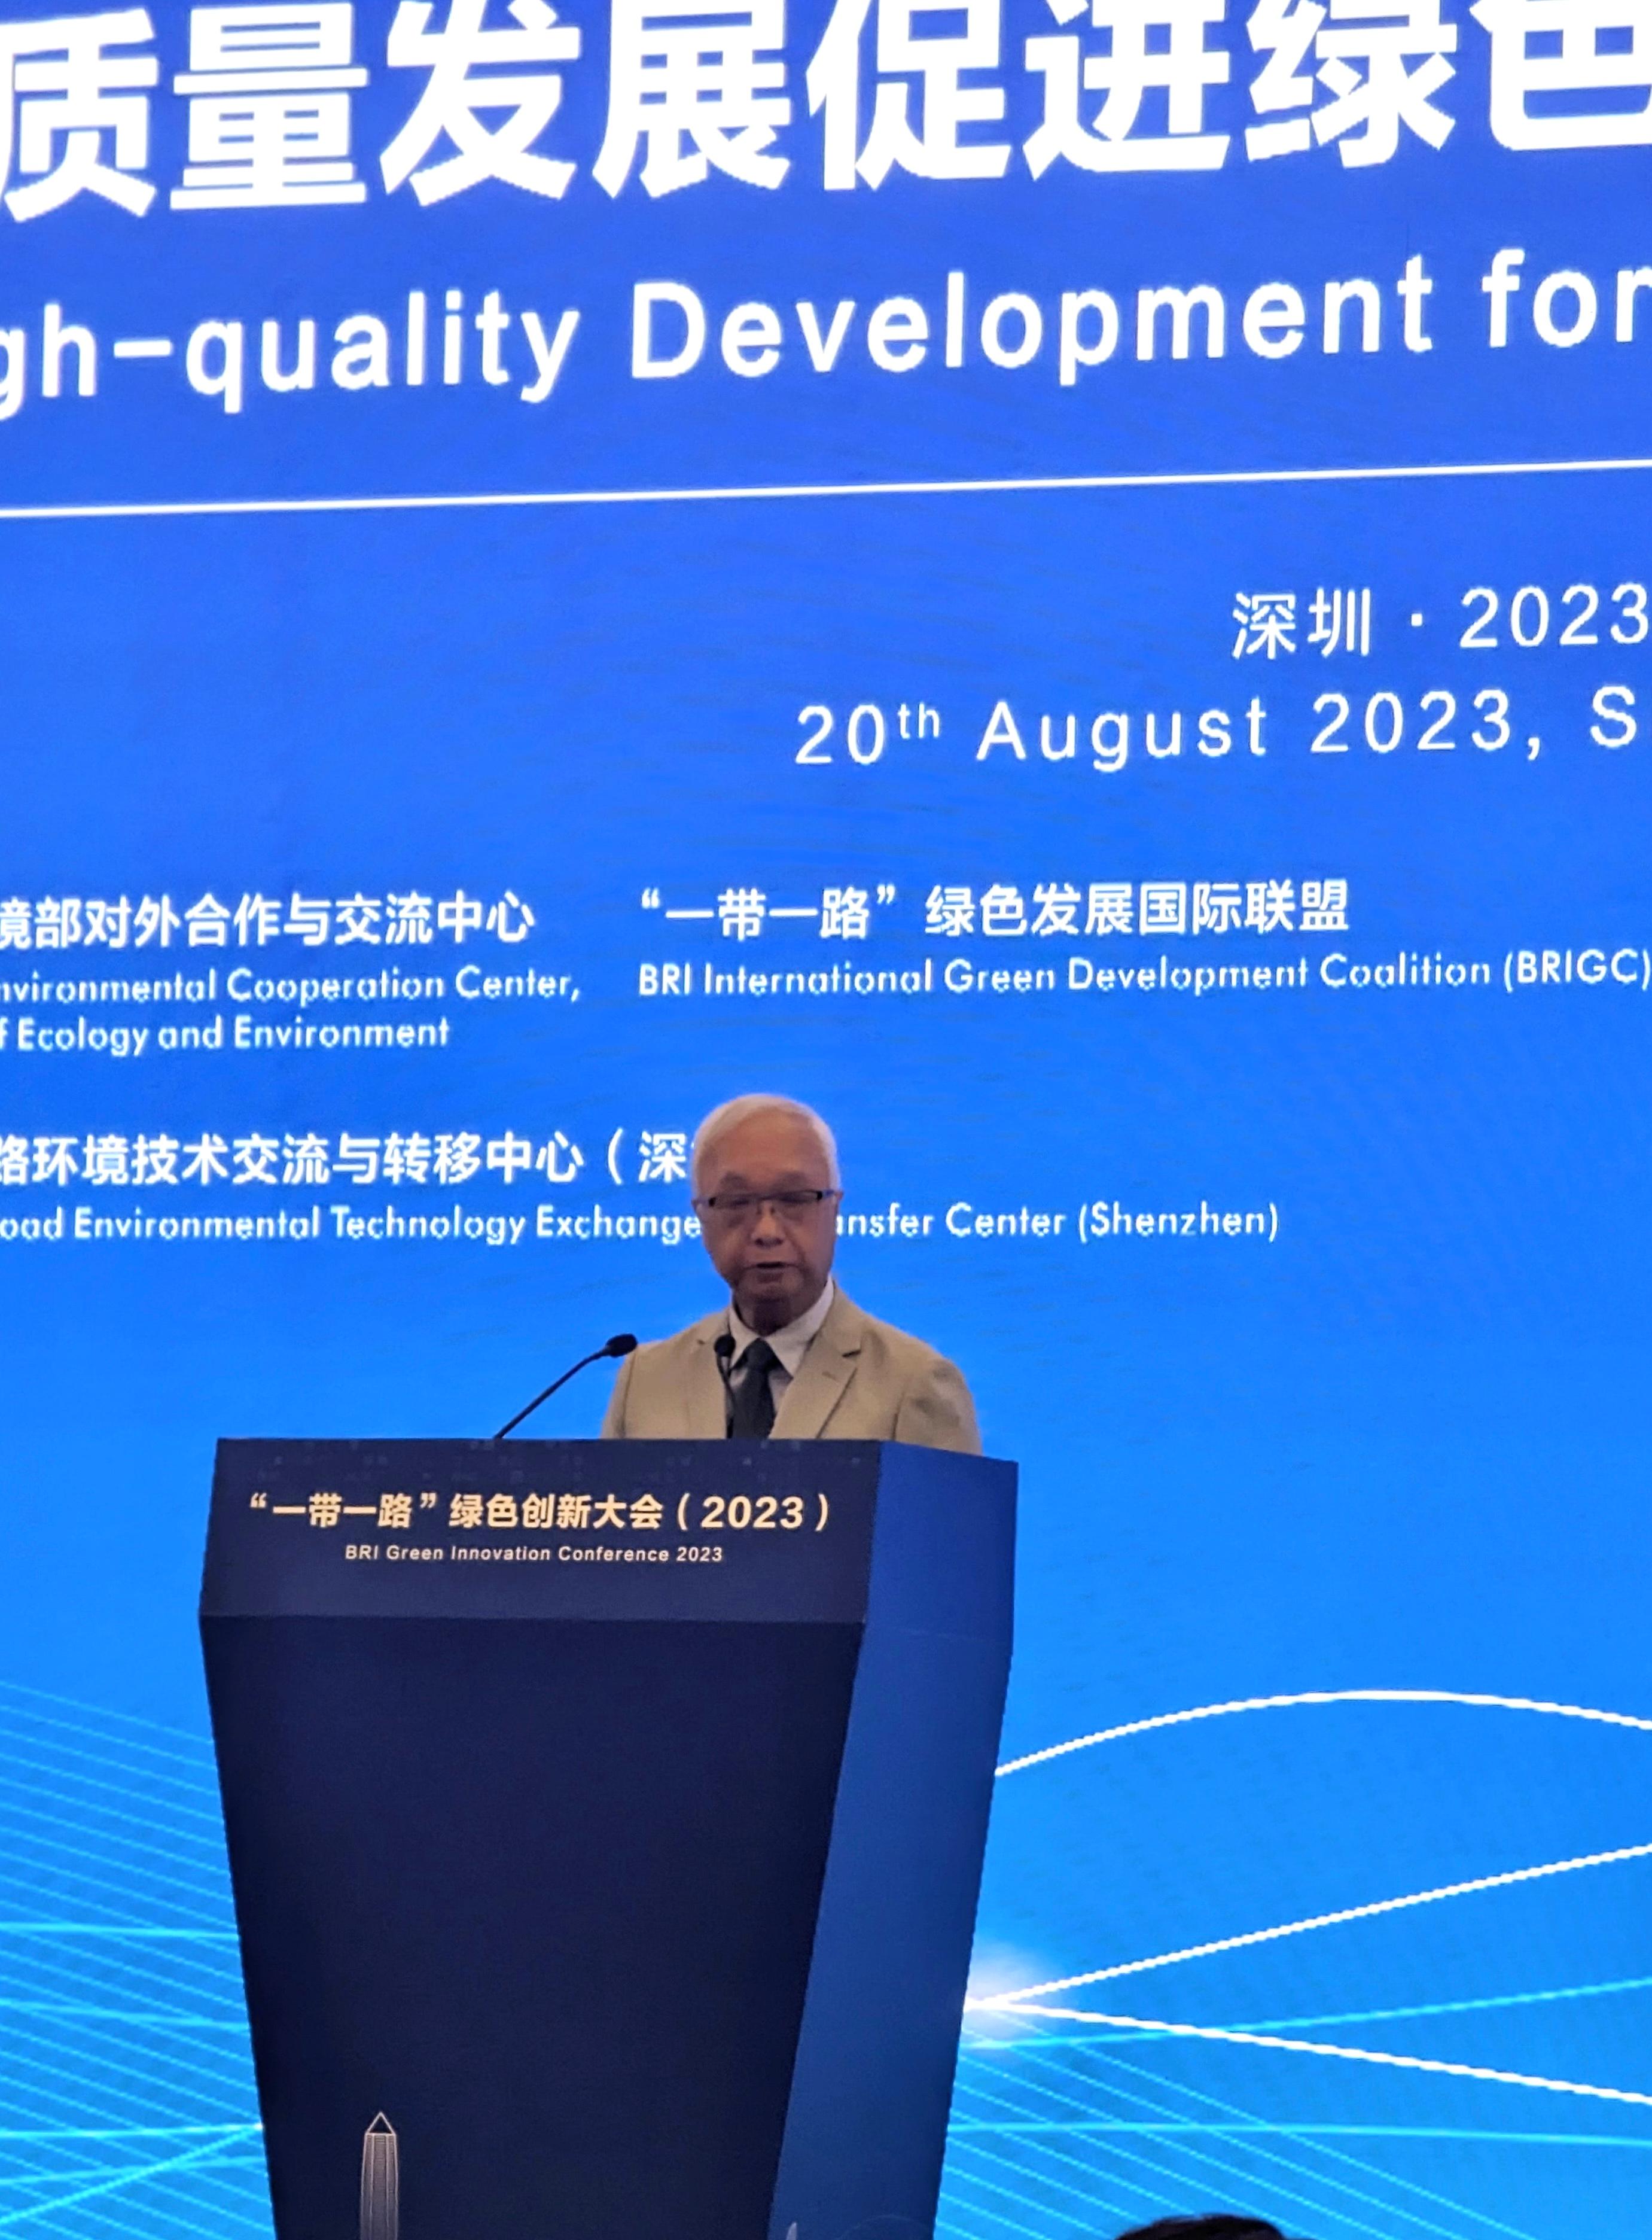 The Secretary for Environment and Ecology, Mr Tse Chin-wan, attended the BRI Green Innovation Conference (2023) held in Shenzhen today (August 20) to share experiences in green innovation with the Belt and Road counterparts, foster mutual learning and exchange views. Photo shows Mr Tse delivering his speech at the opening ceremony.